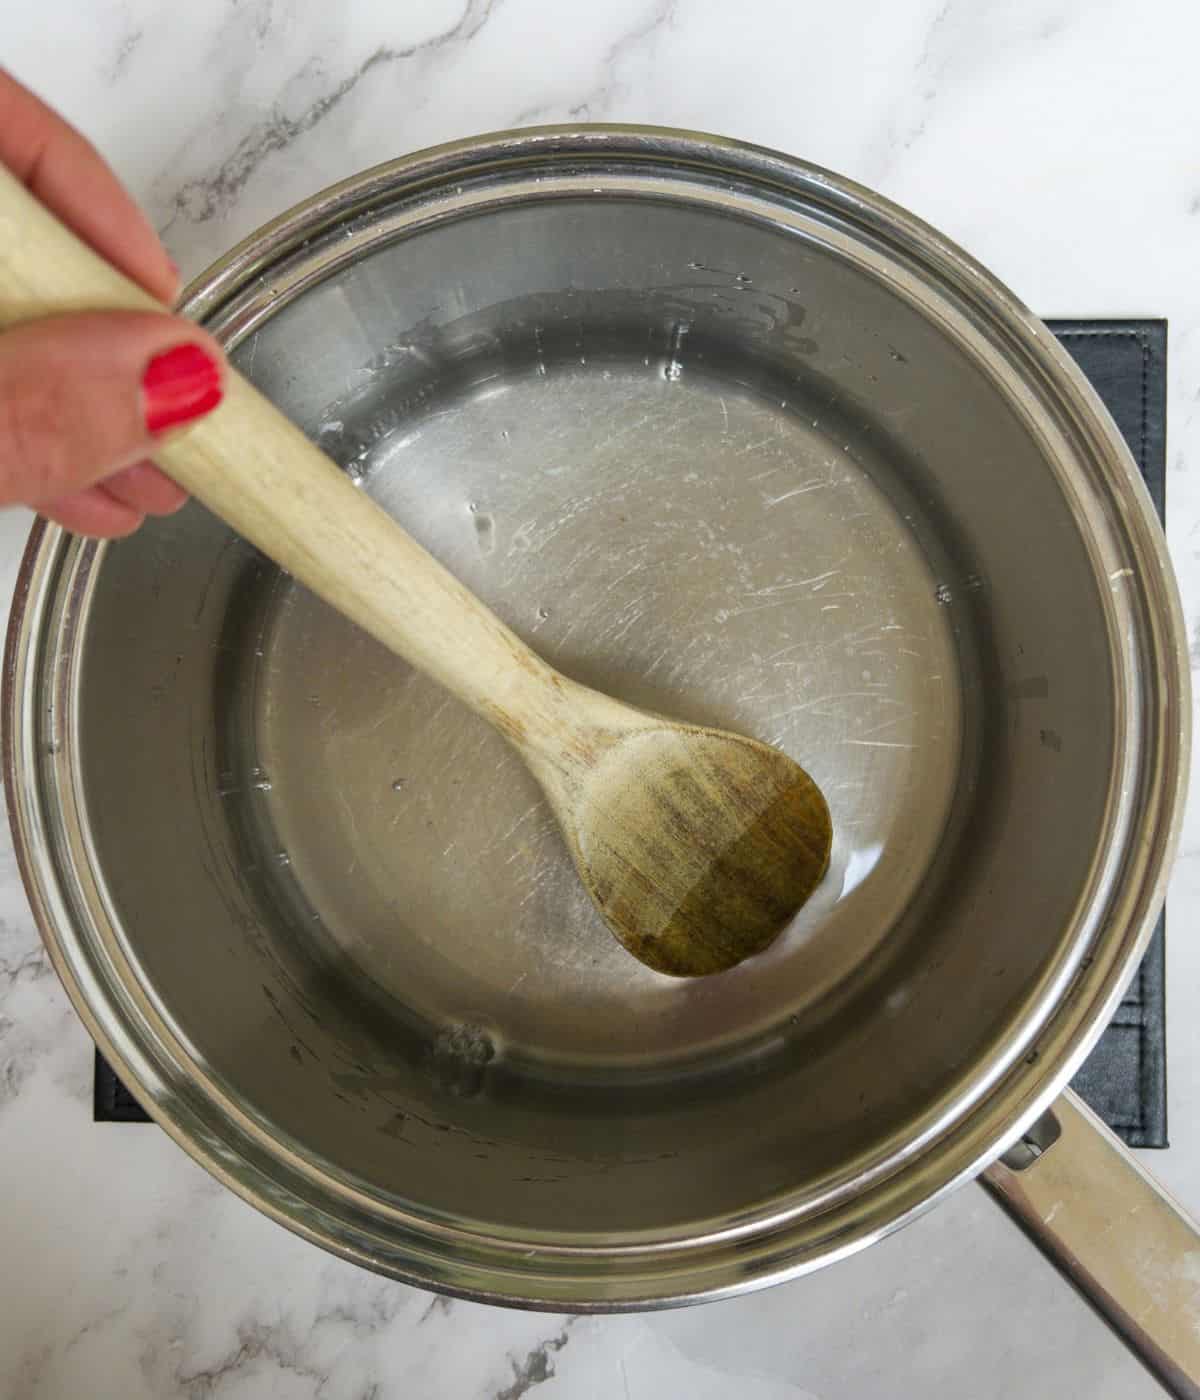 Melted coconut oil in a saucepan being mixed with a wooden spoon.